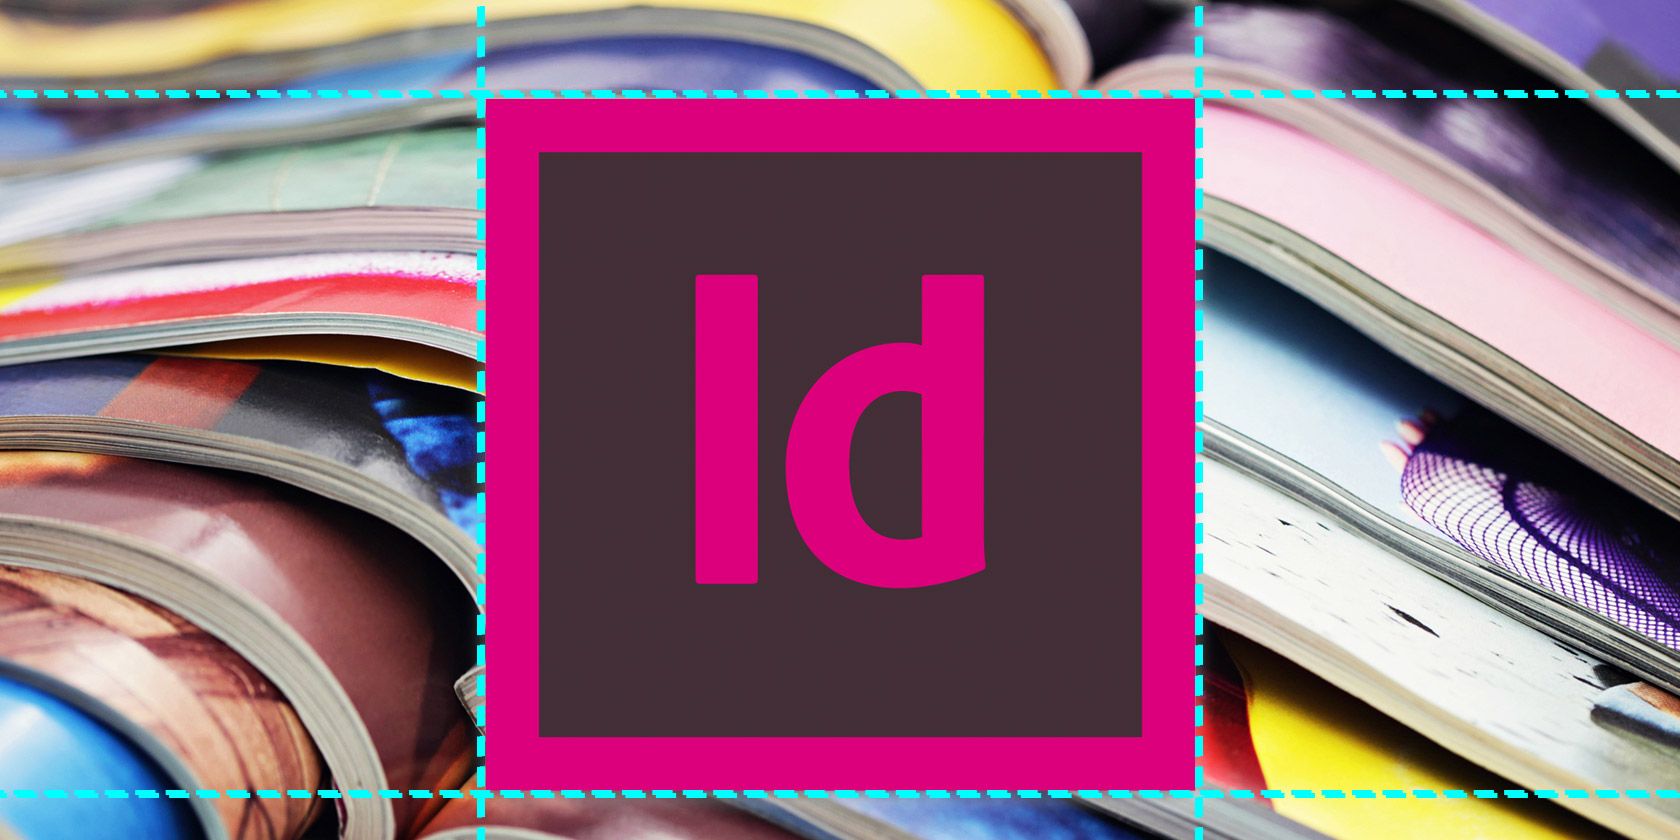 indesign free book templates